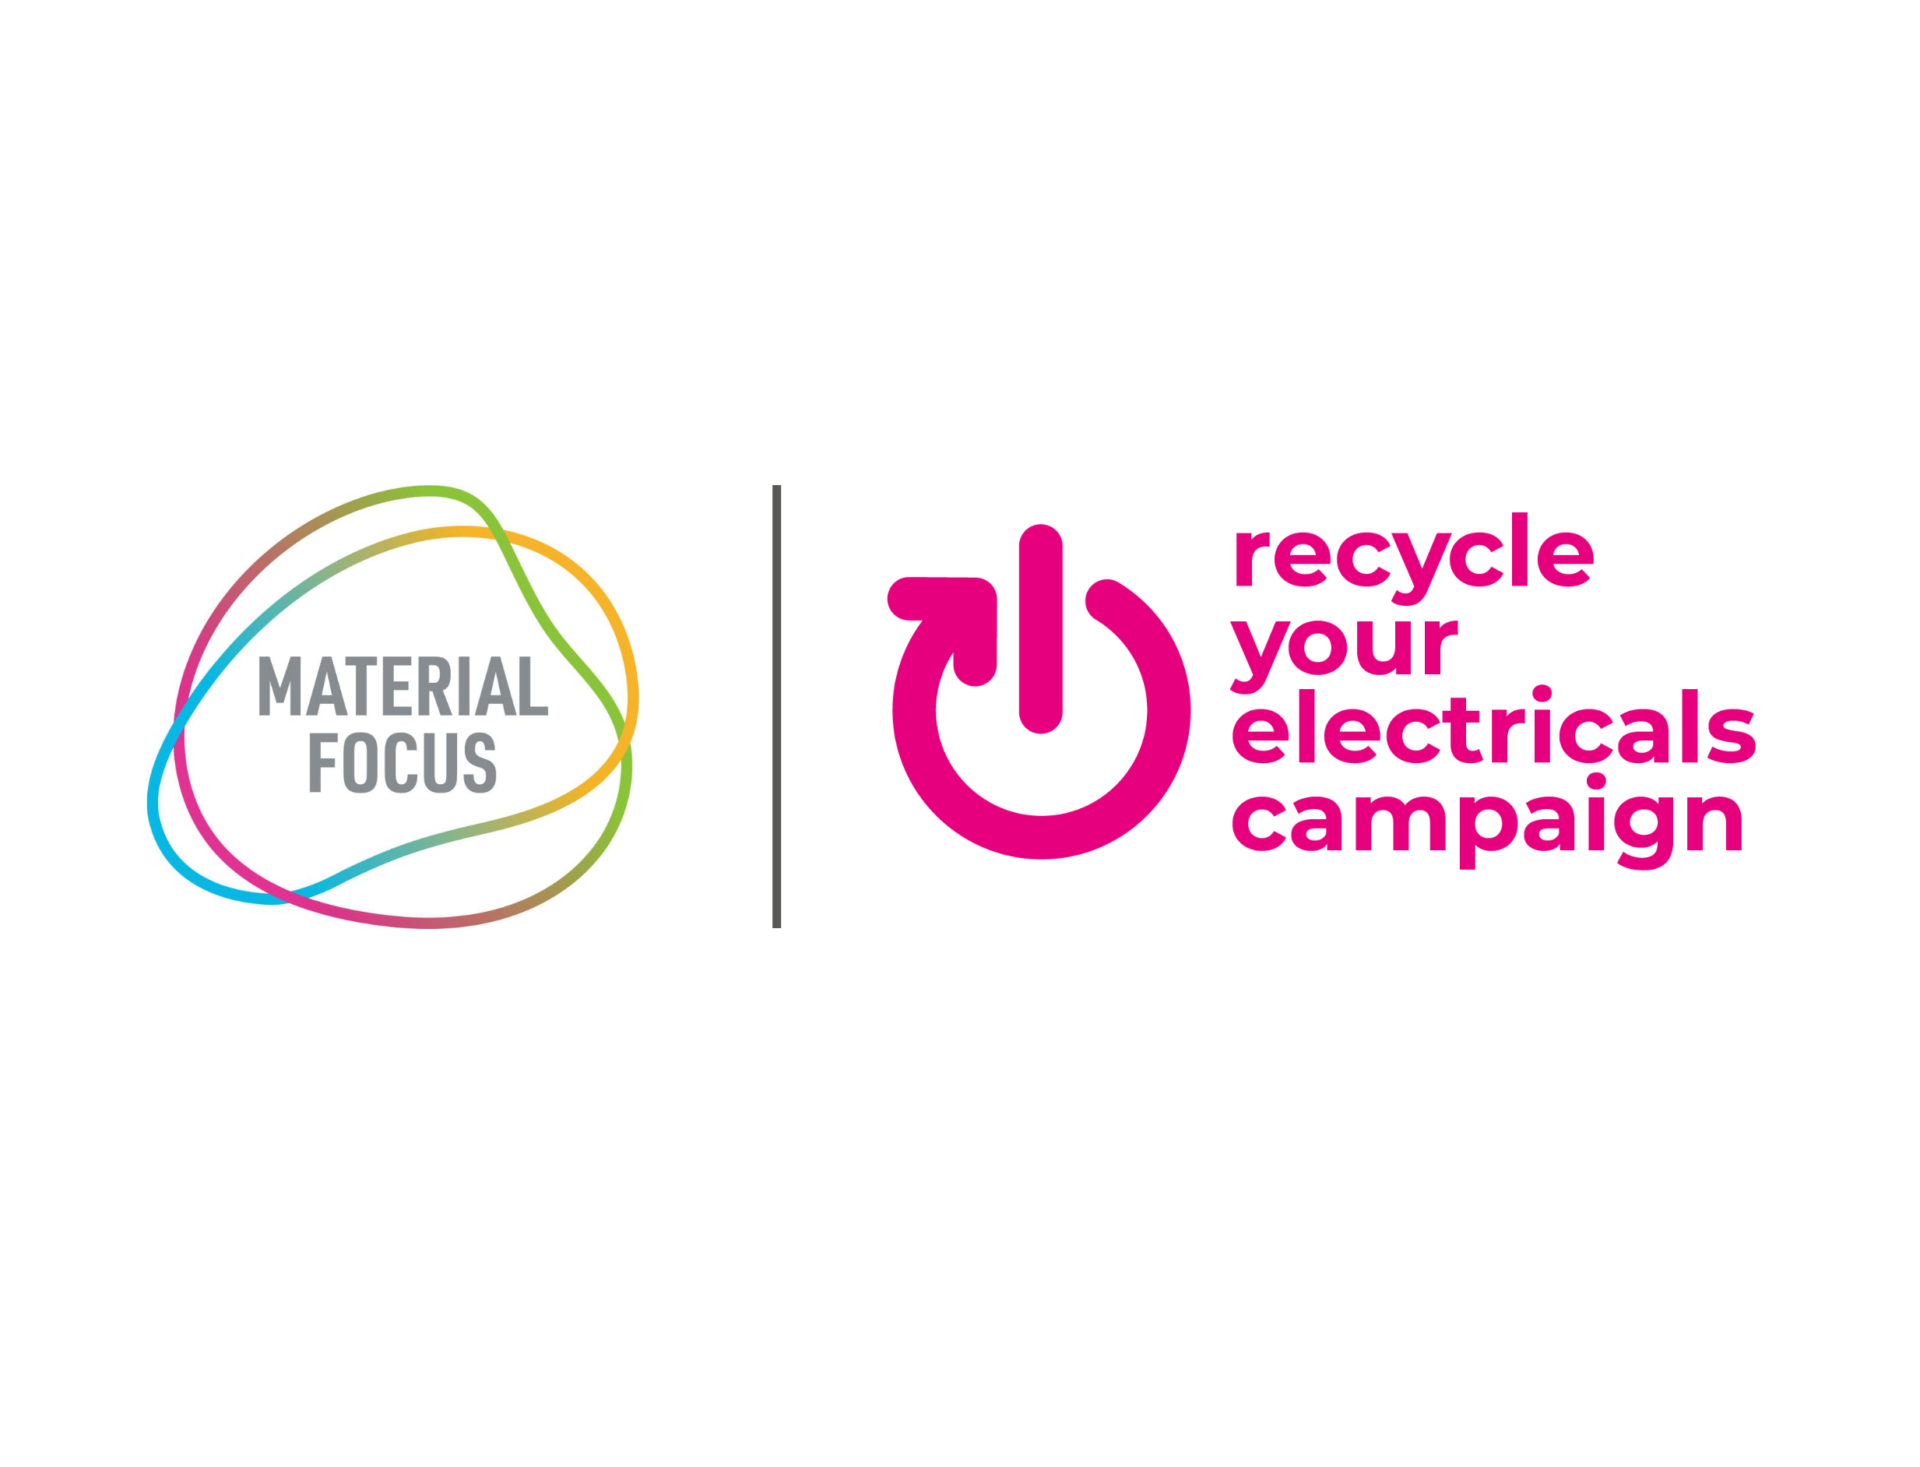 Recycle Your Electricals campaign logo, from Material Focus